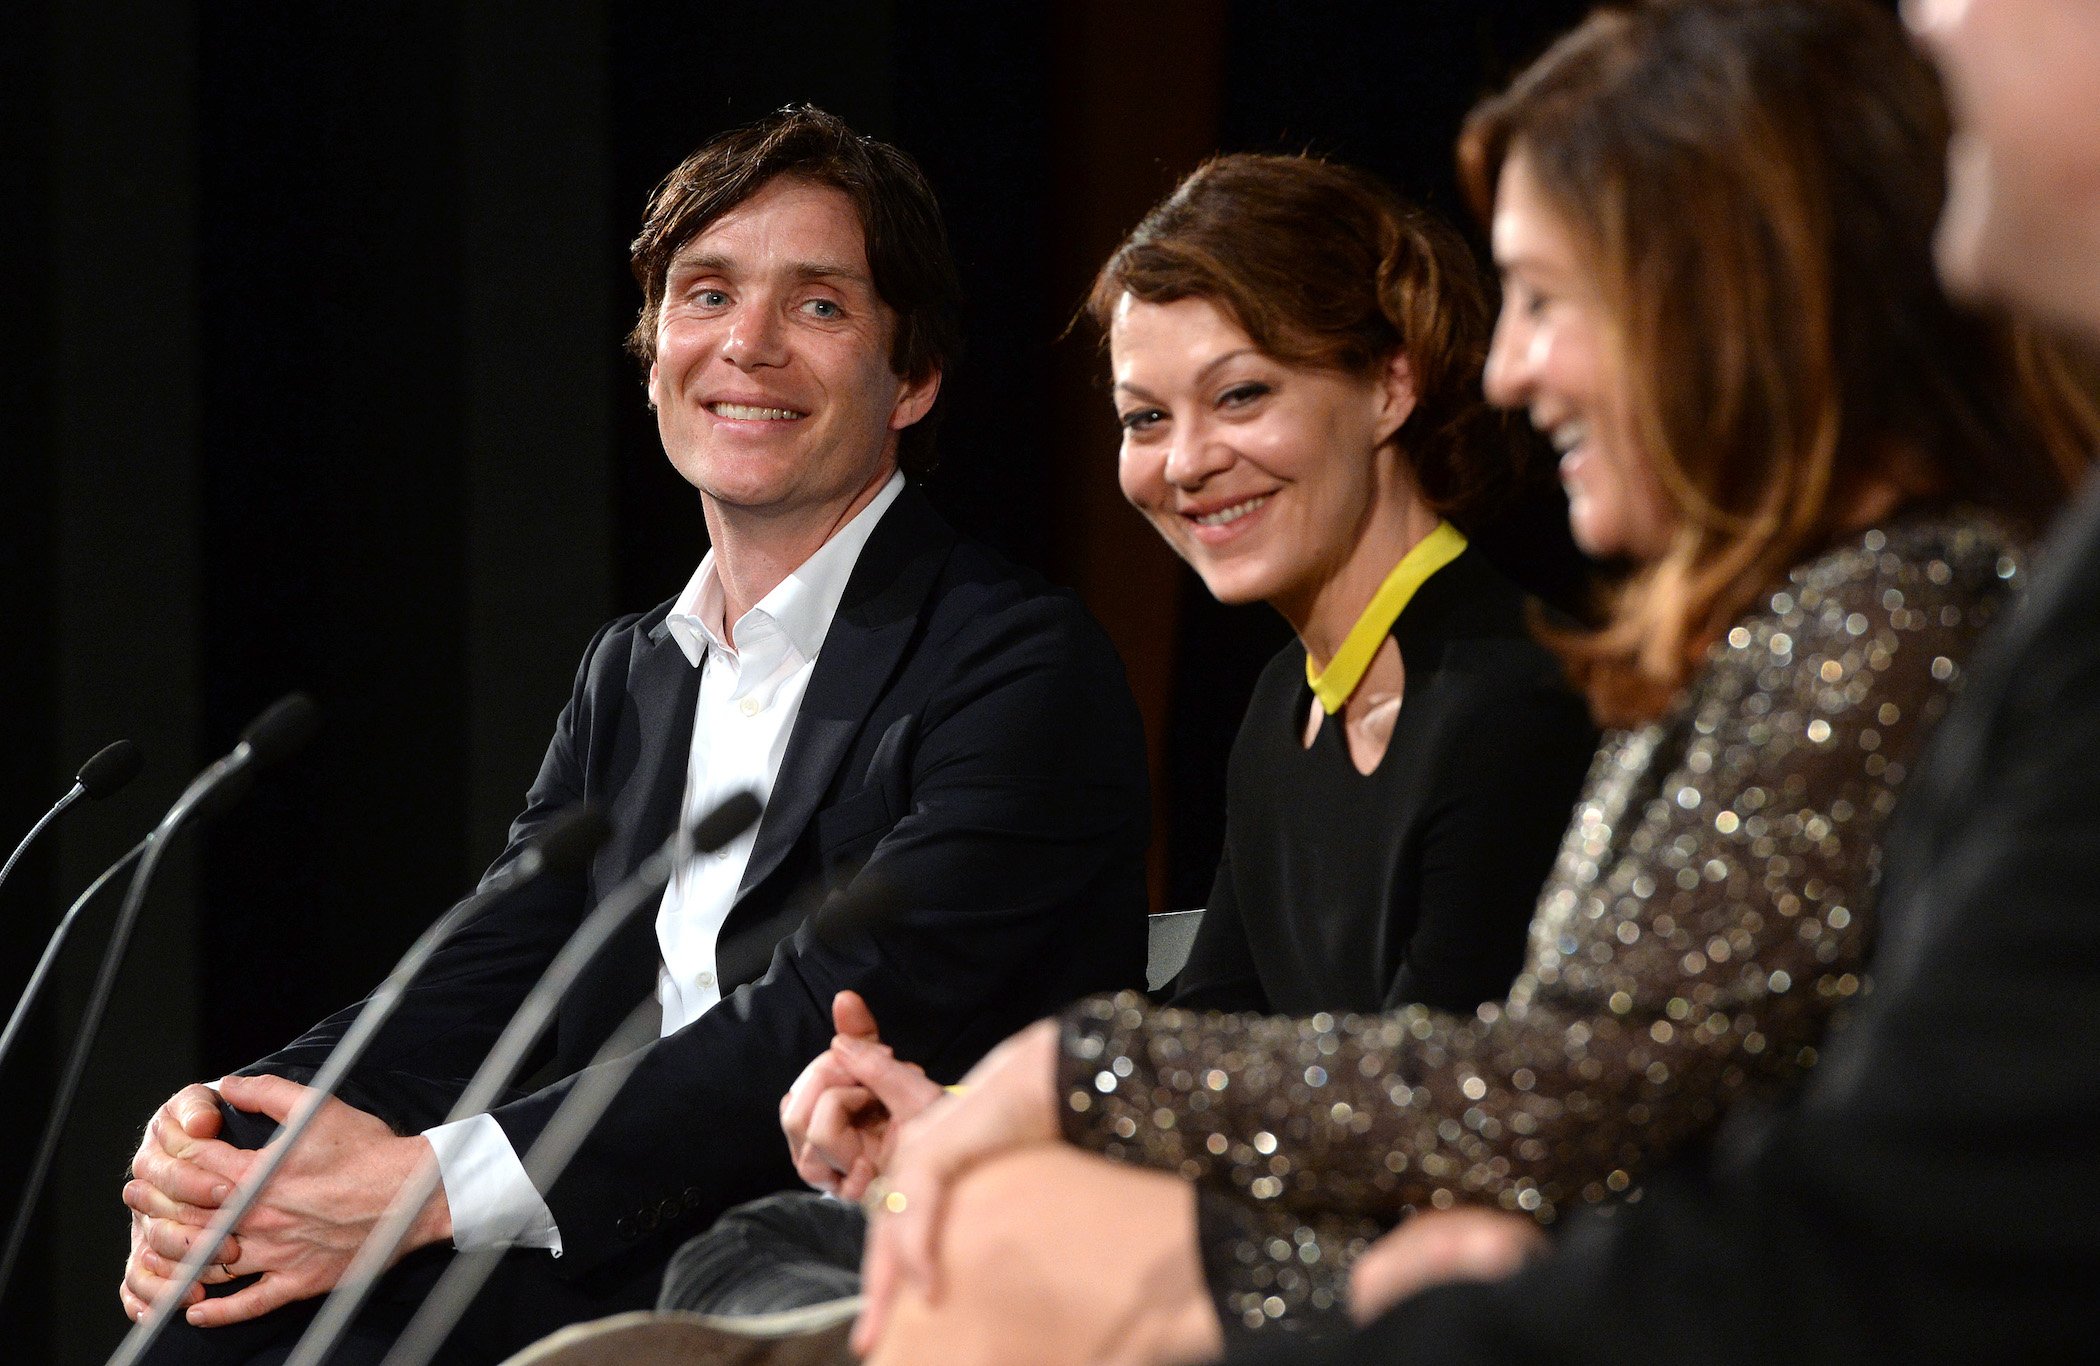 Cillian Murphy from 'Peaky Blinders' Season 6 and Helen McCrory smiling against a black background during a Q&A